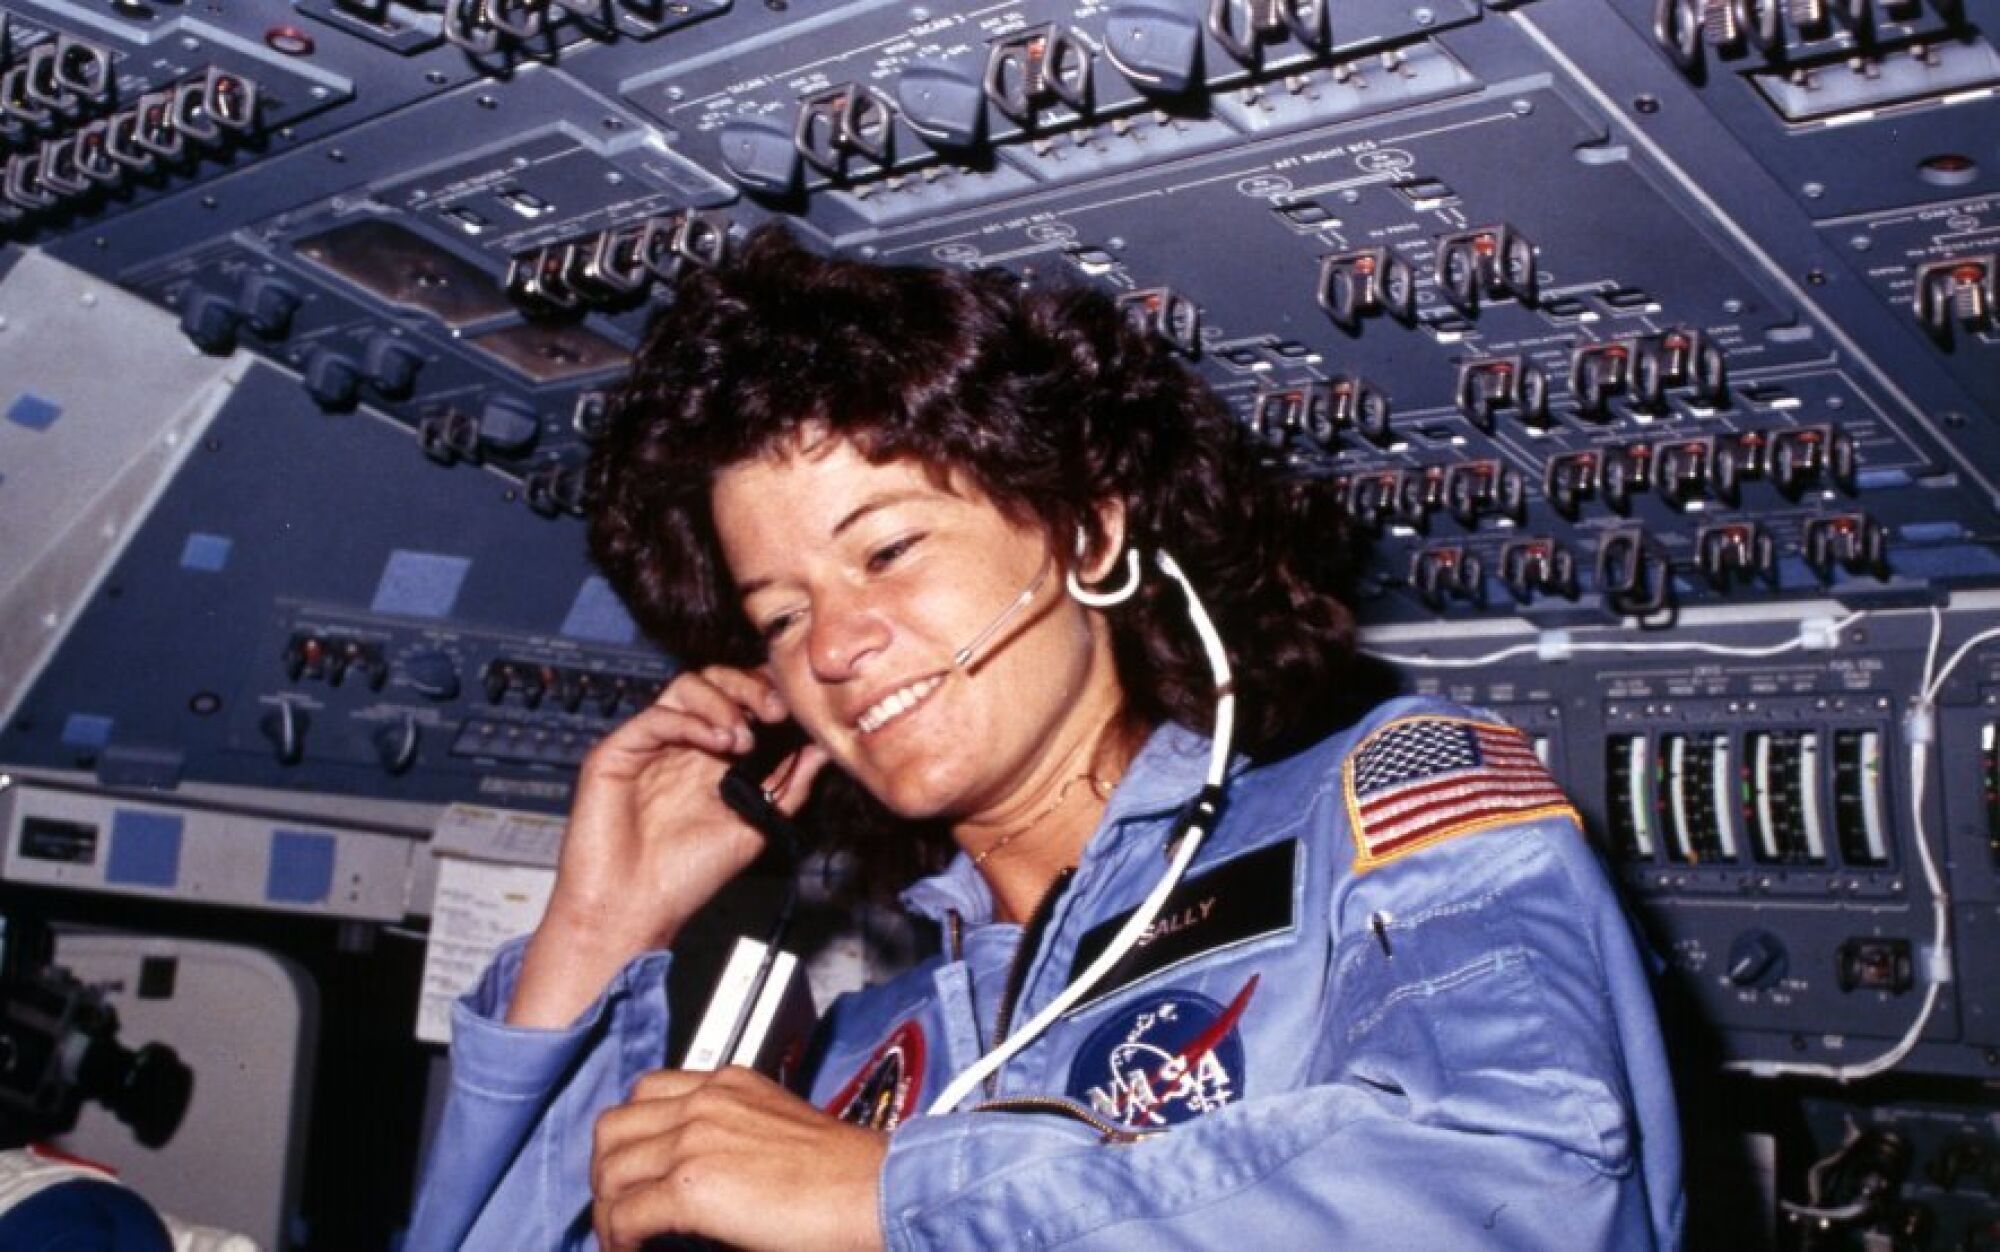 Famous San Diegan Sally Ride was the first American woman to fly in space. She blasted off on the Challenger space shuttle in 1983. The flight also gave her the title of youngest American in space at age 32. In 1984 she flew on the Challenger again and then served on the panels investigating the Challenger explosion in 1986 and the breakup of the Columbia shuttle on reentry in 2003. After retiring from NASA, she became a professor at UC San Diego and continues working to teach and advocate for science, technology, engineering and mathematics.